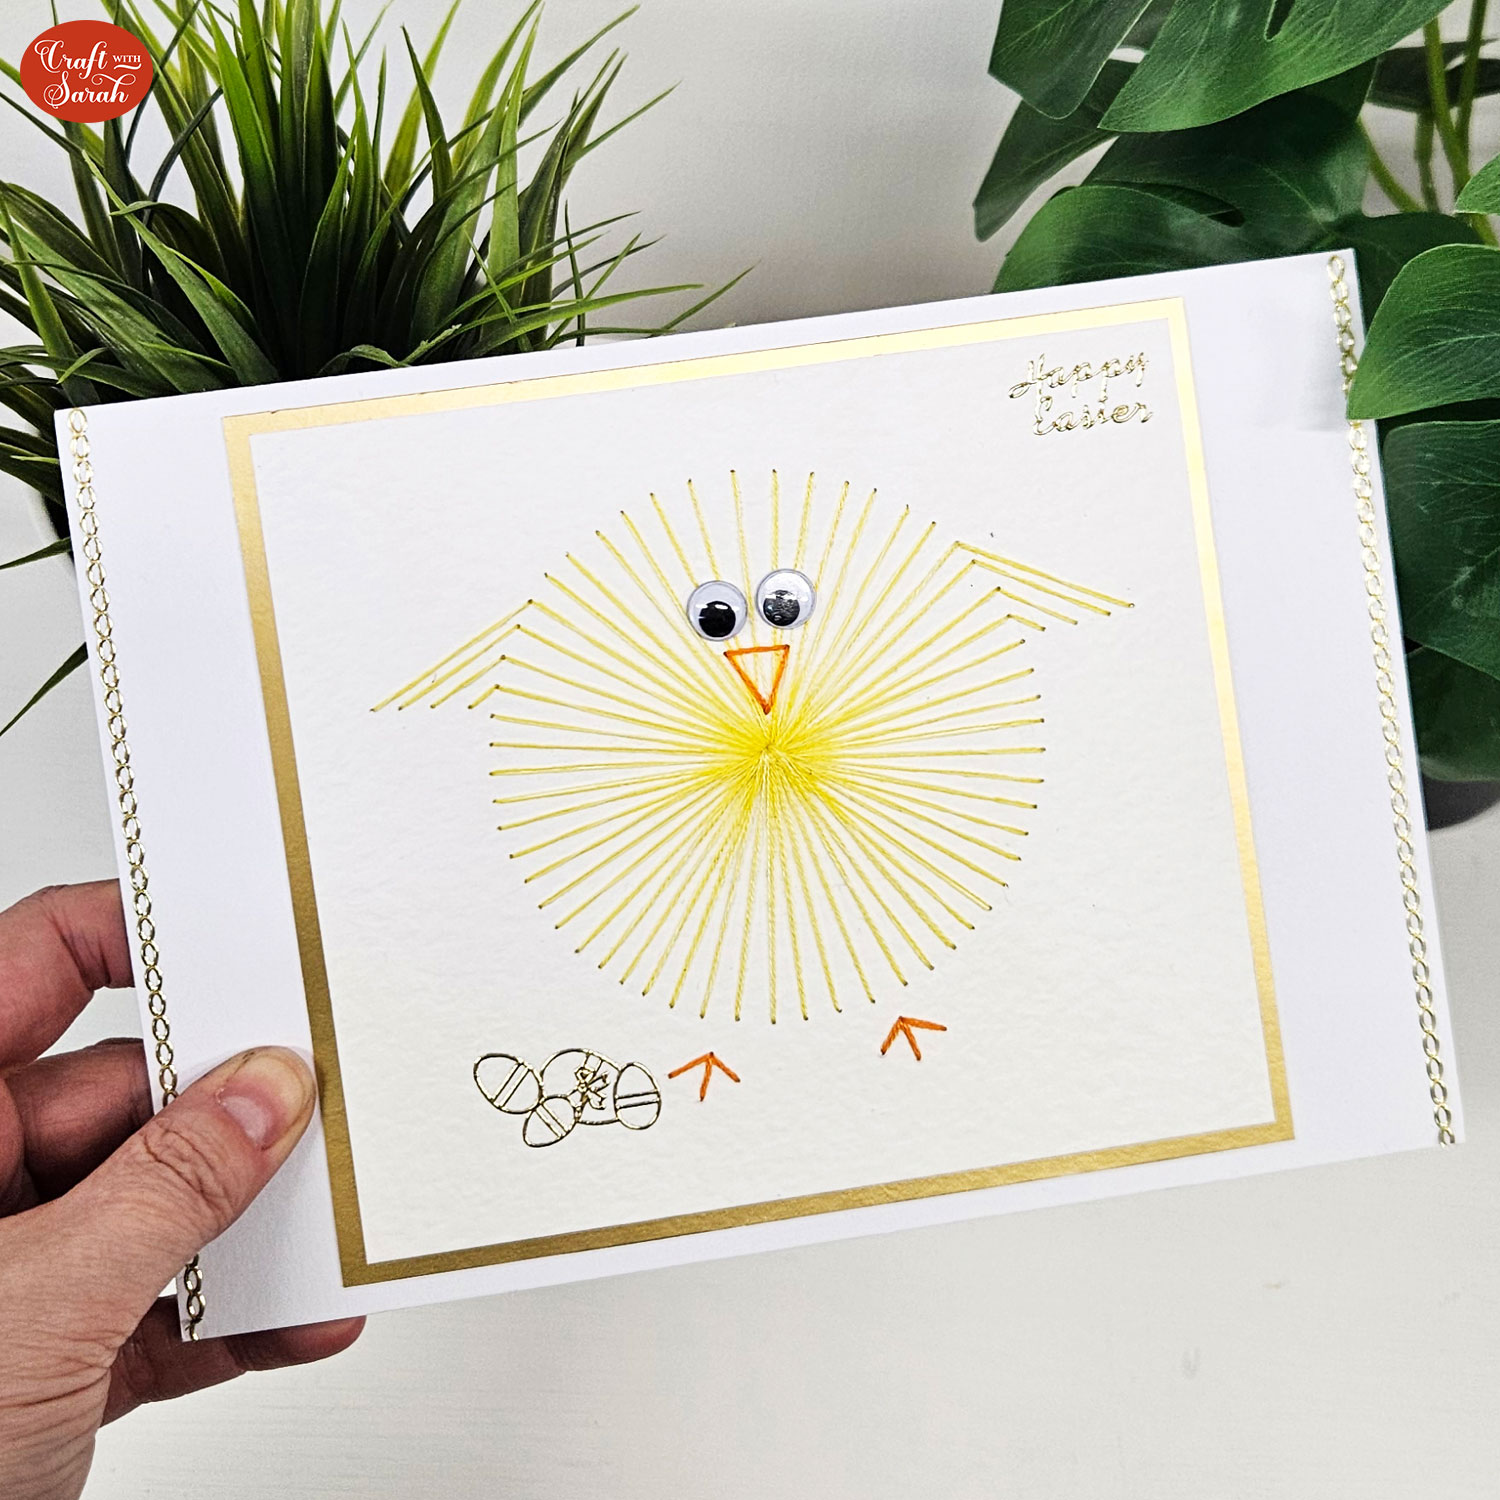 Free Easter Chick Card Stitching Pattern